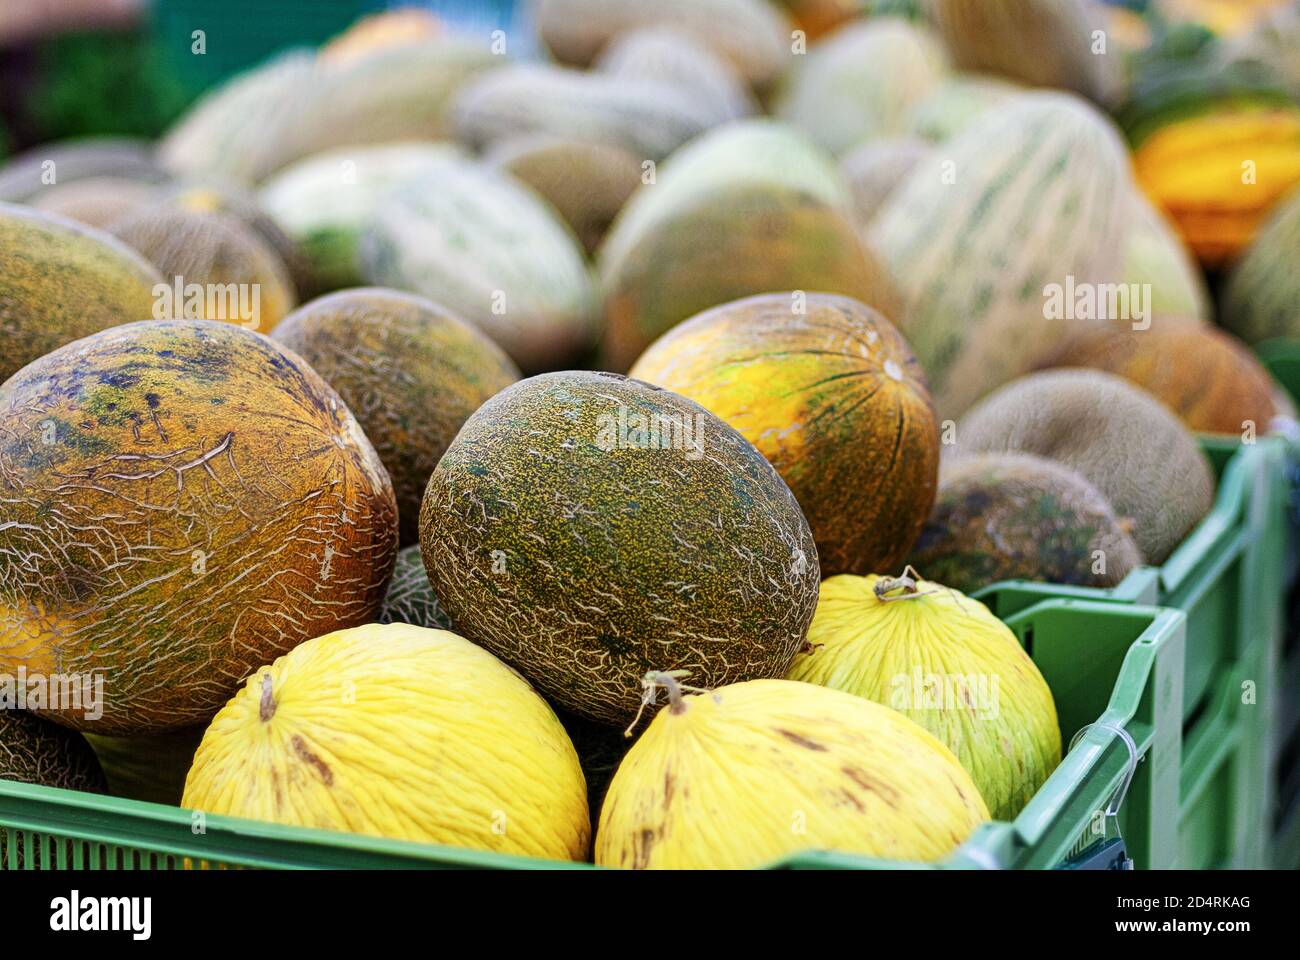 melons of different types sold in grocery store Stock Photo